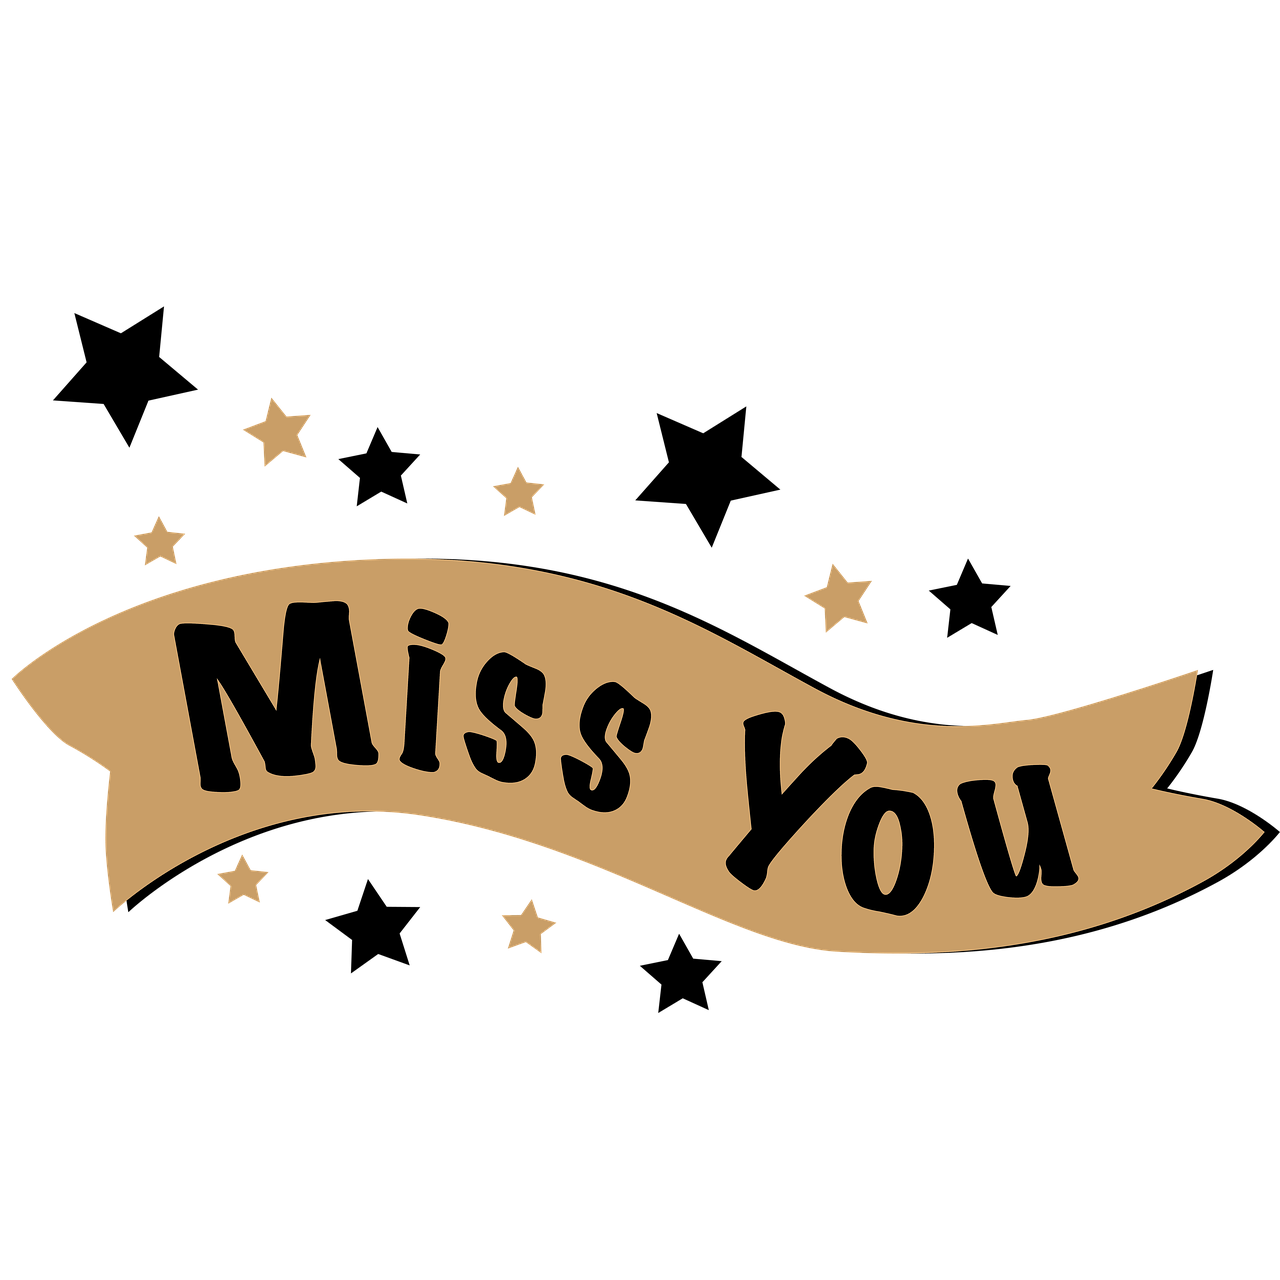 Lettering, miss you, banner, free picture, free photo